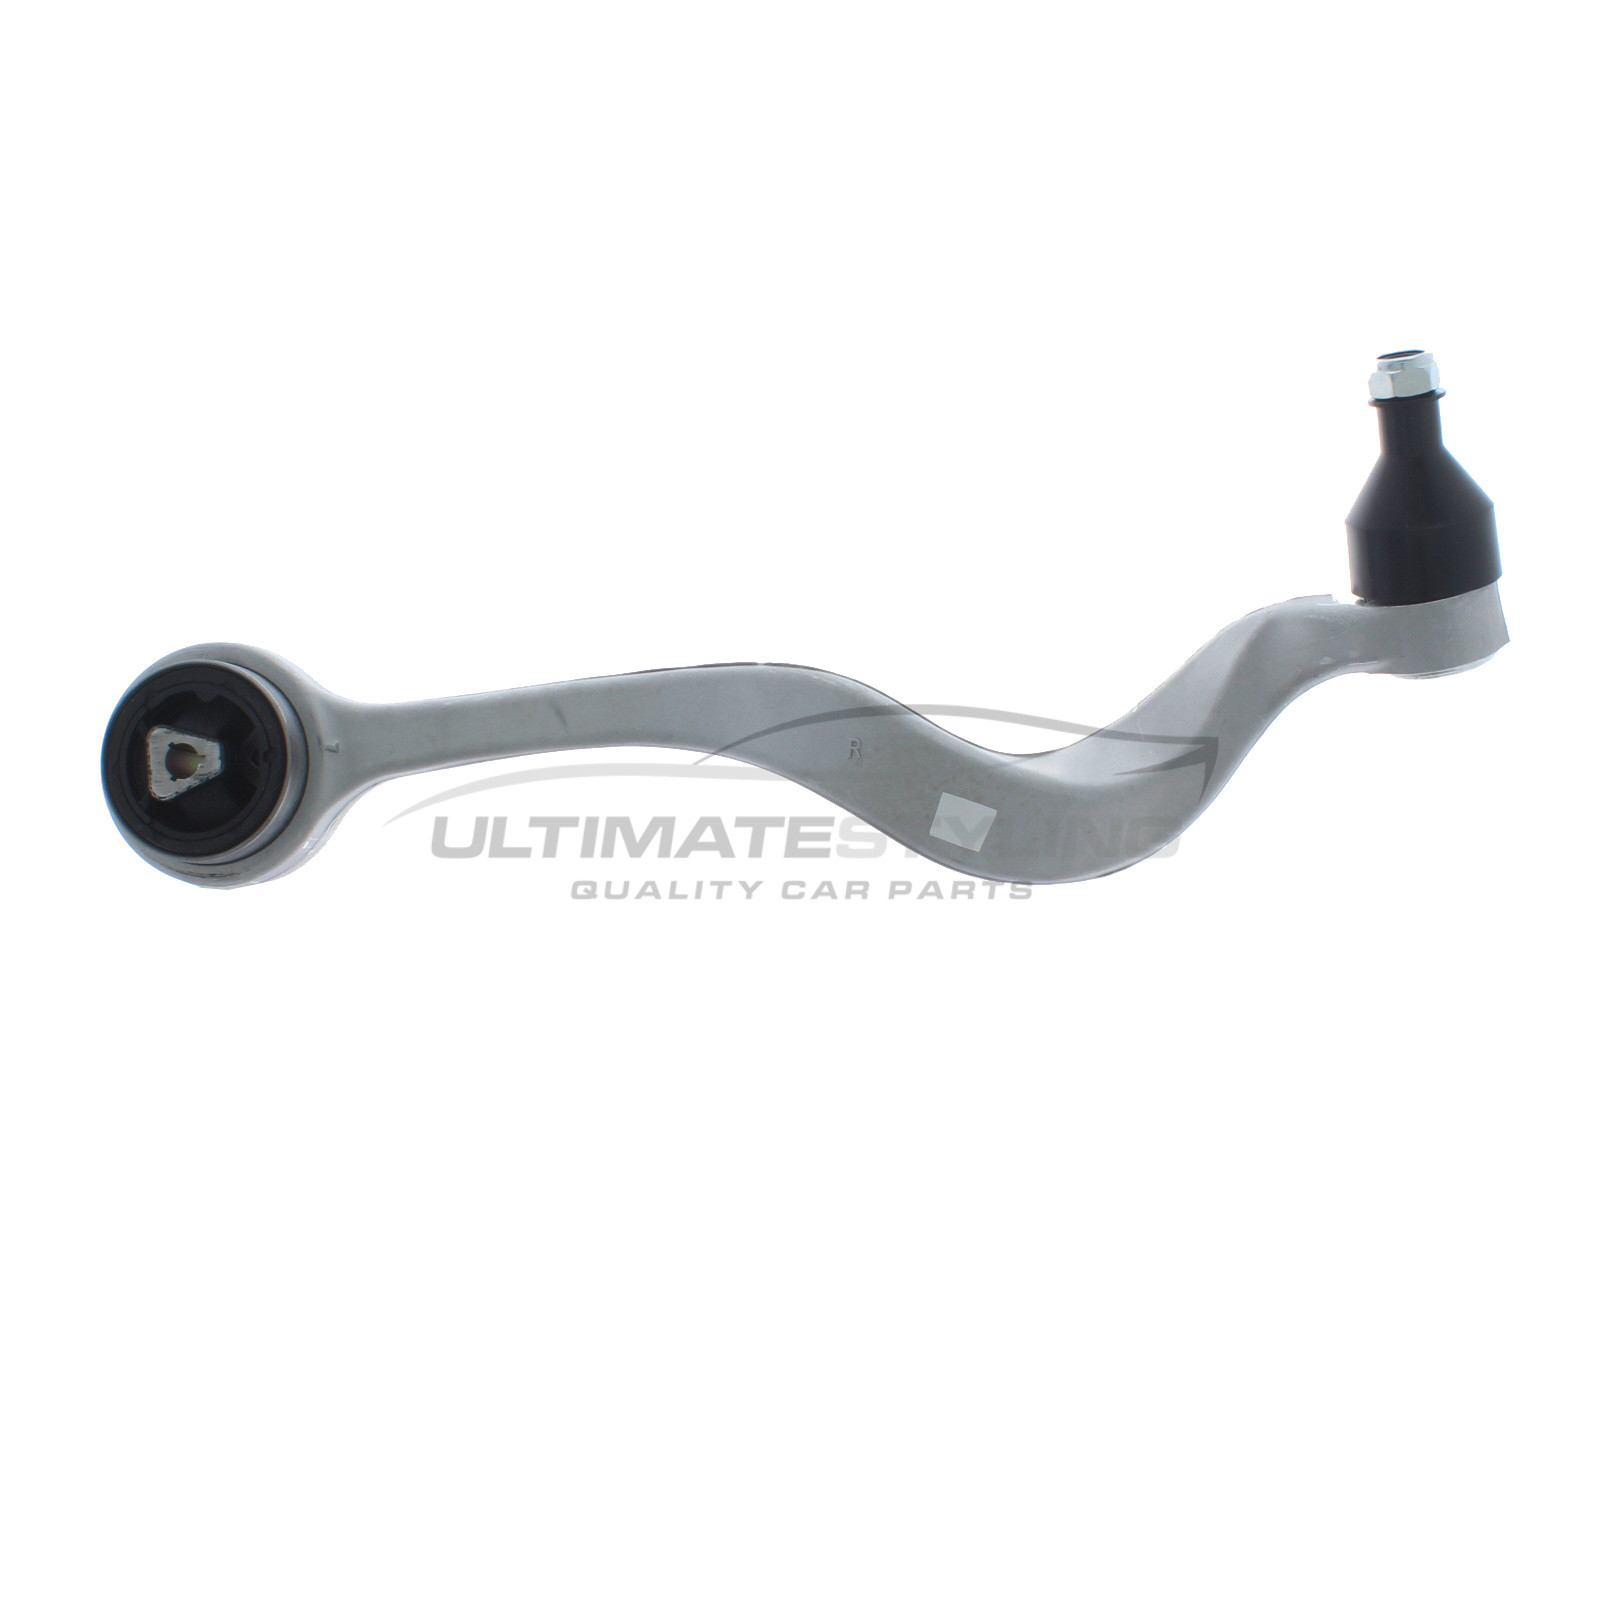 BMW 5 Series 2003-2010 Front Lower Suspension Arm (Alloy) Including Ball Joint Front of Wheel